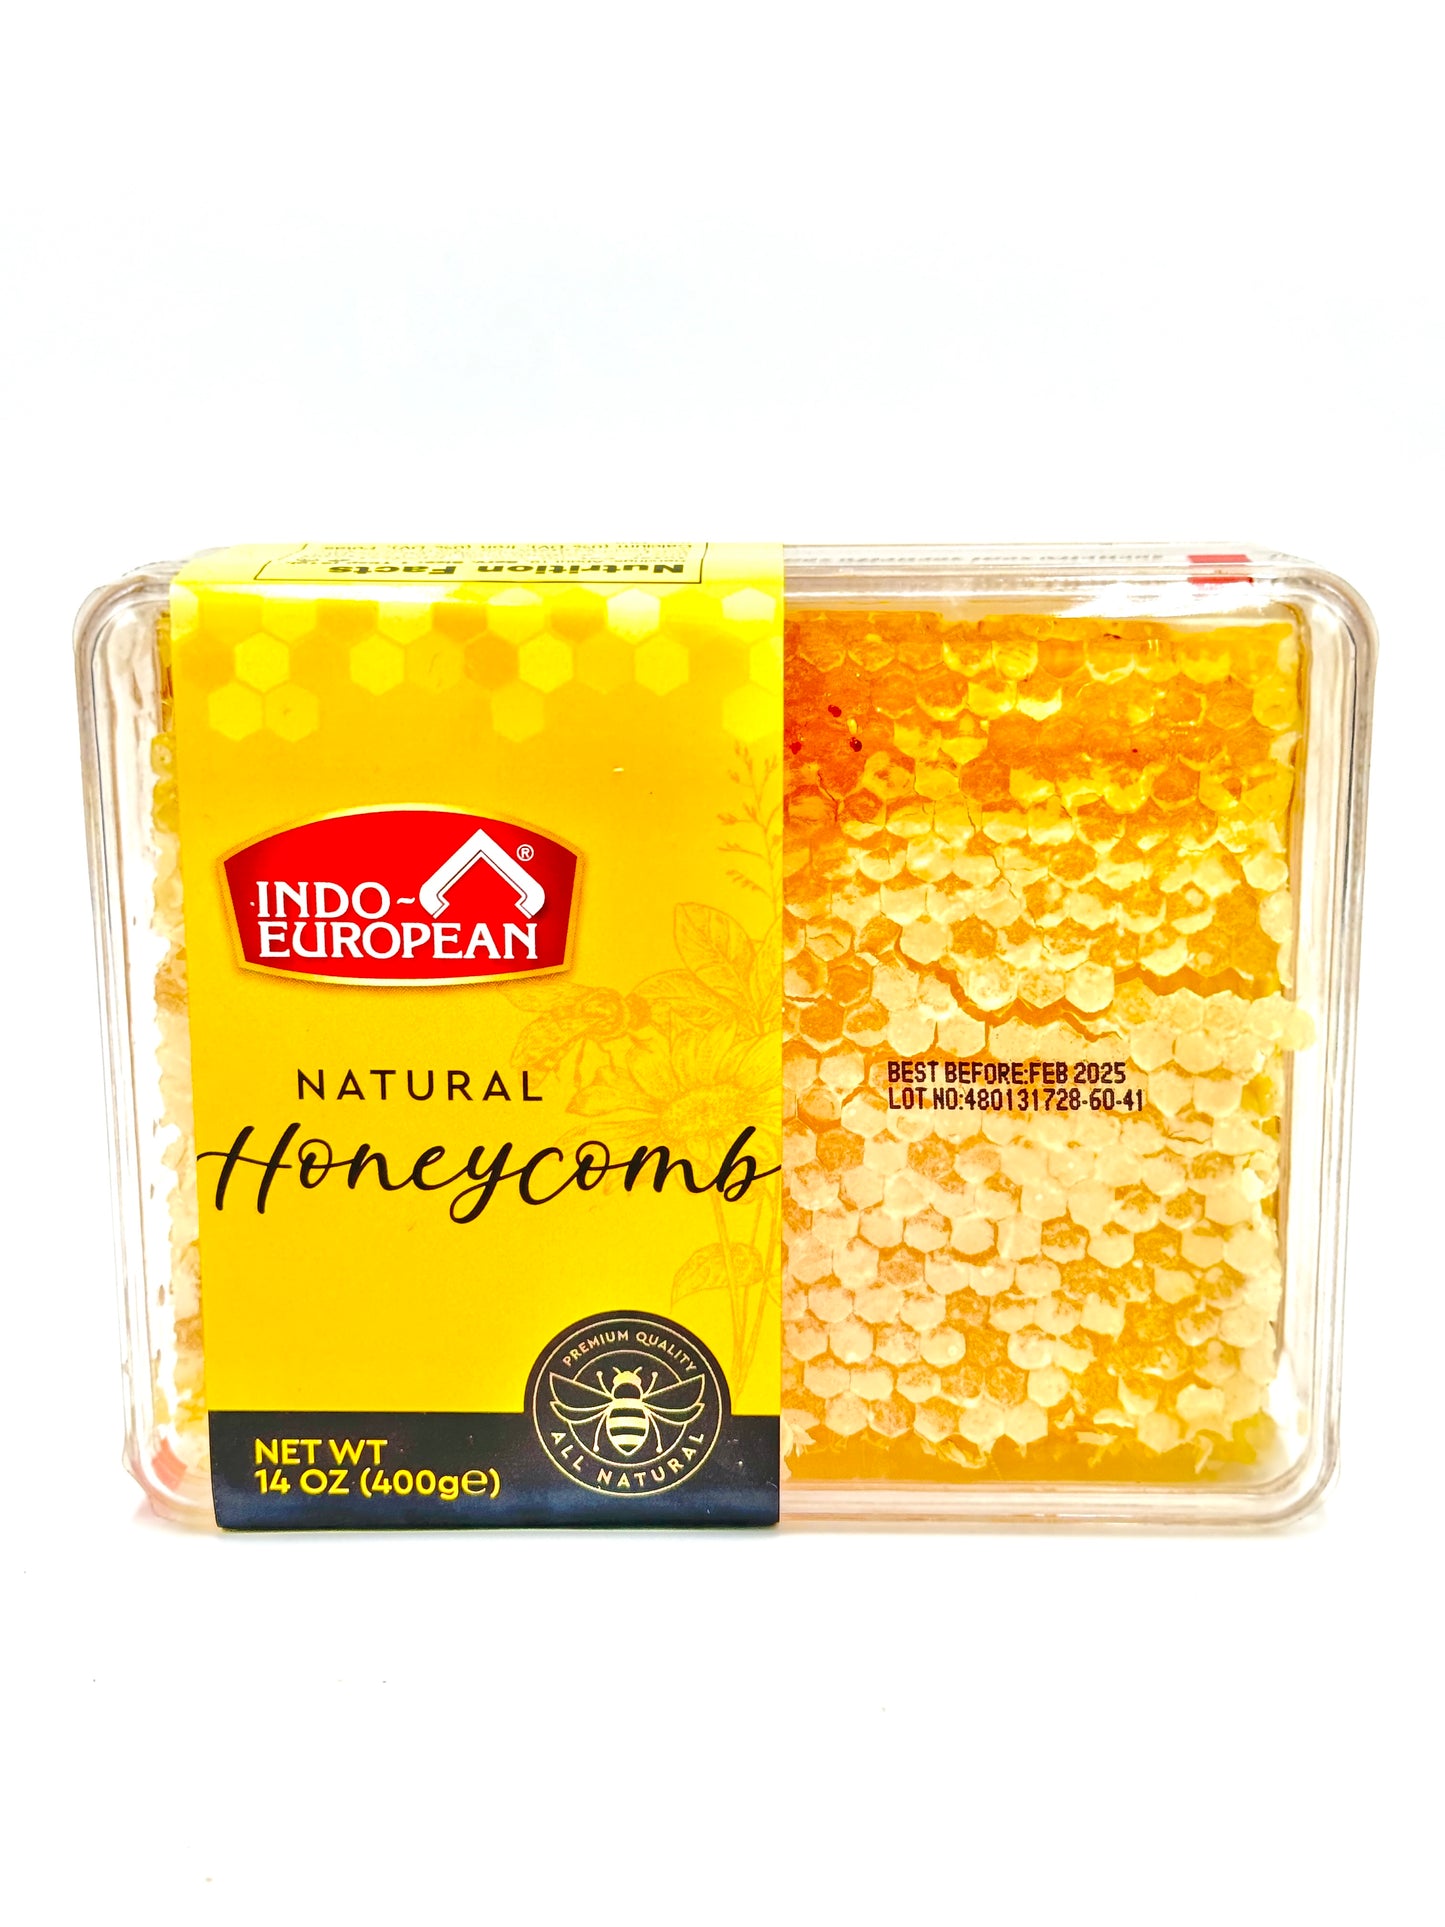 pack of Indo-European Natural Honeycomb, 400g